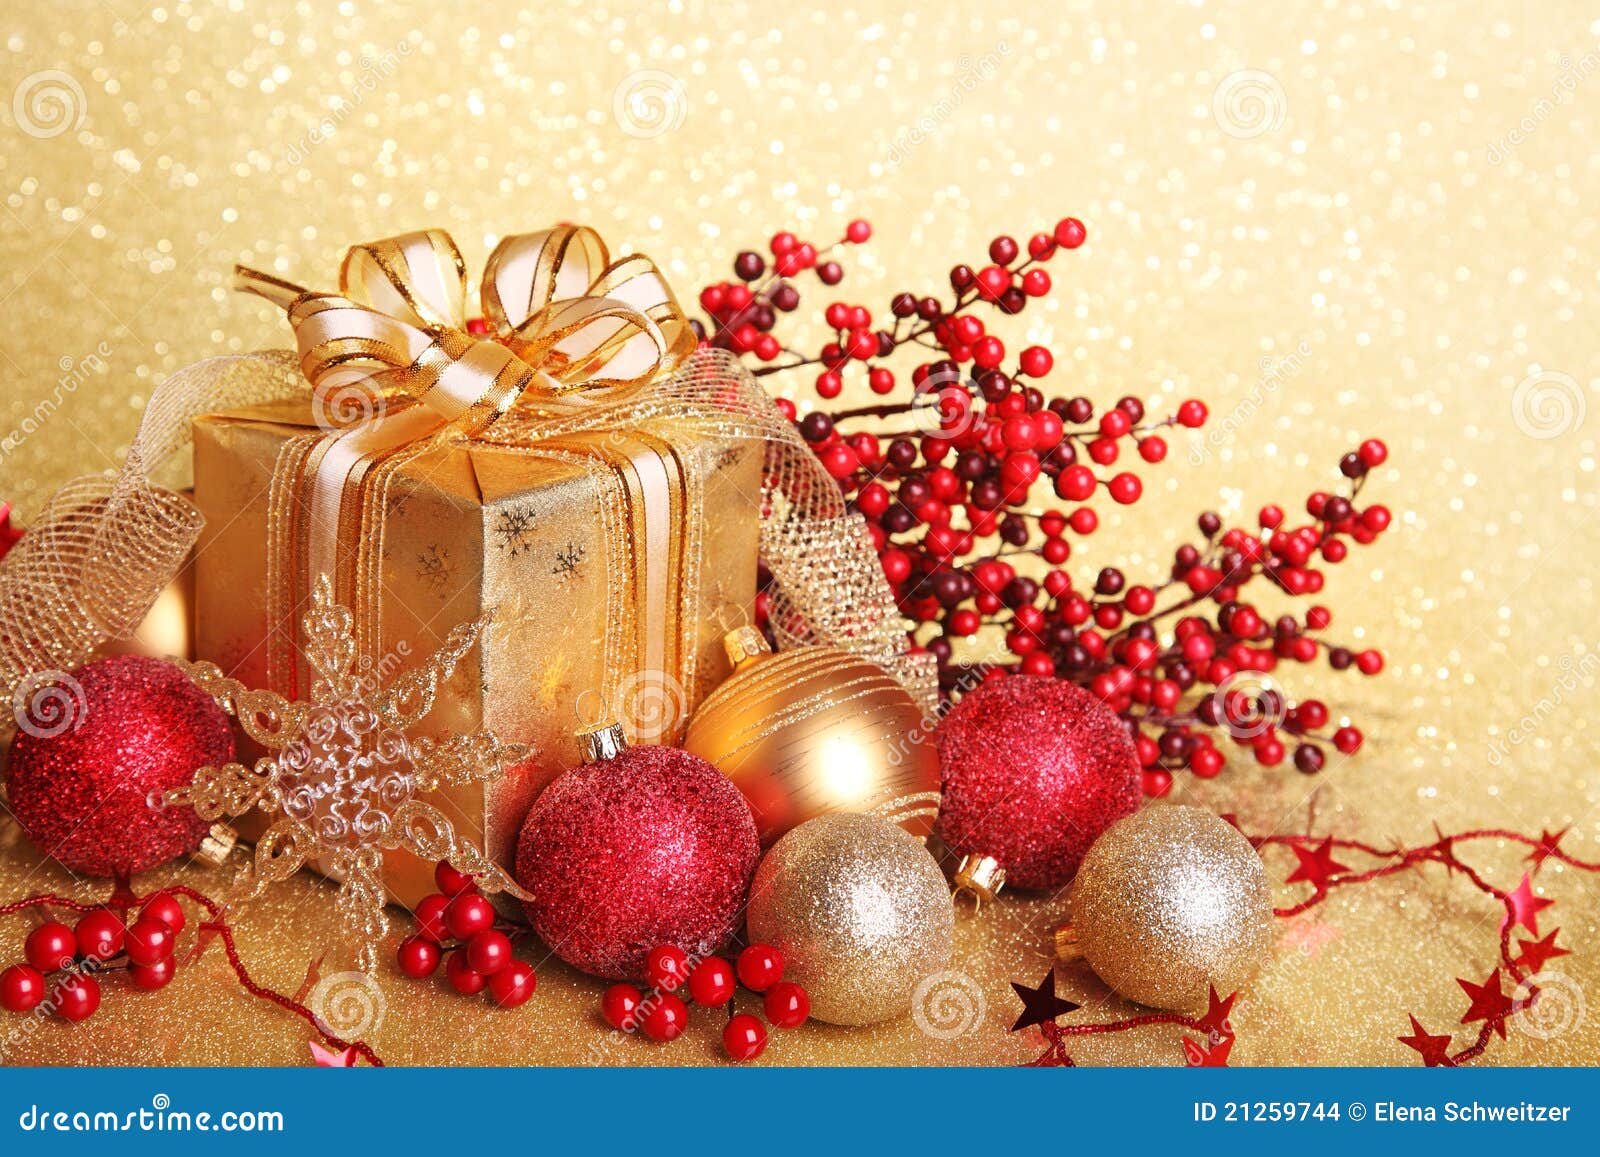 Christmas gift box stock photo. Image of baubles, lights - 21259744